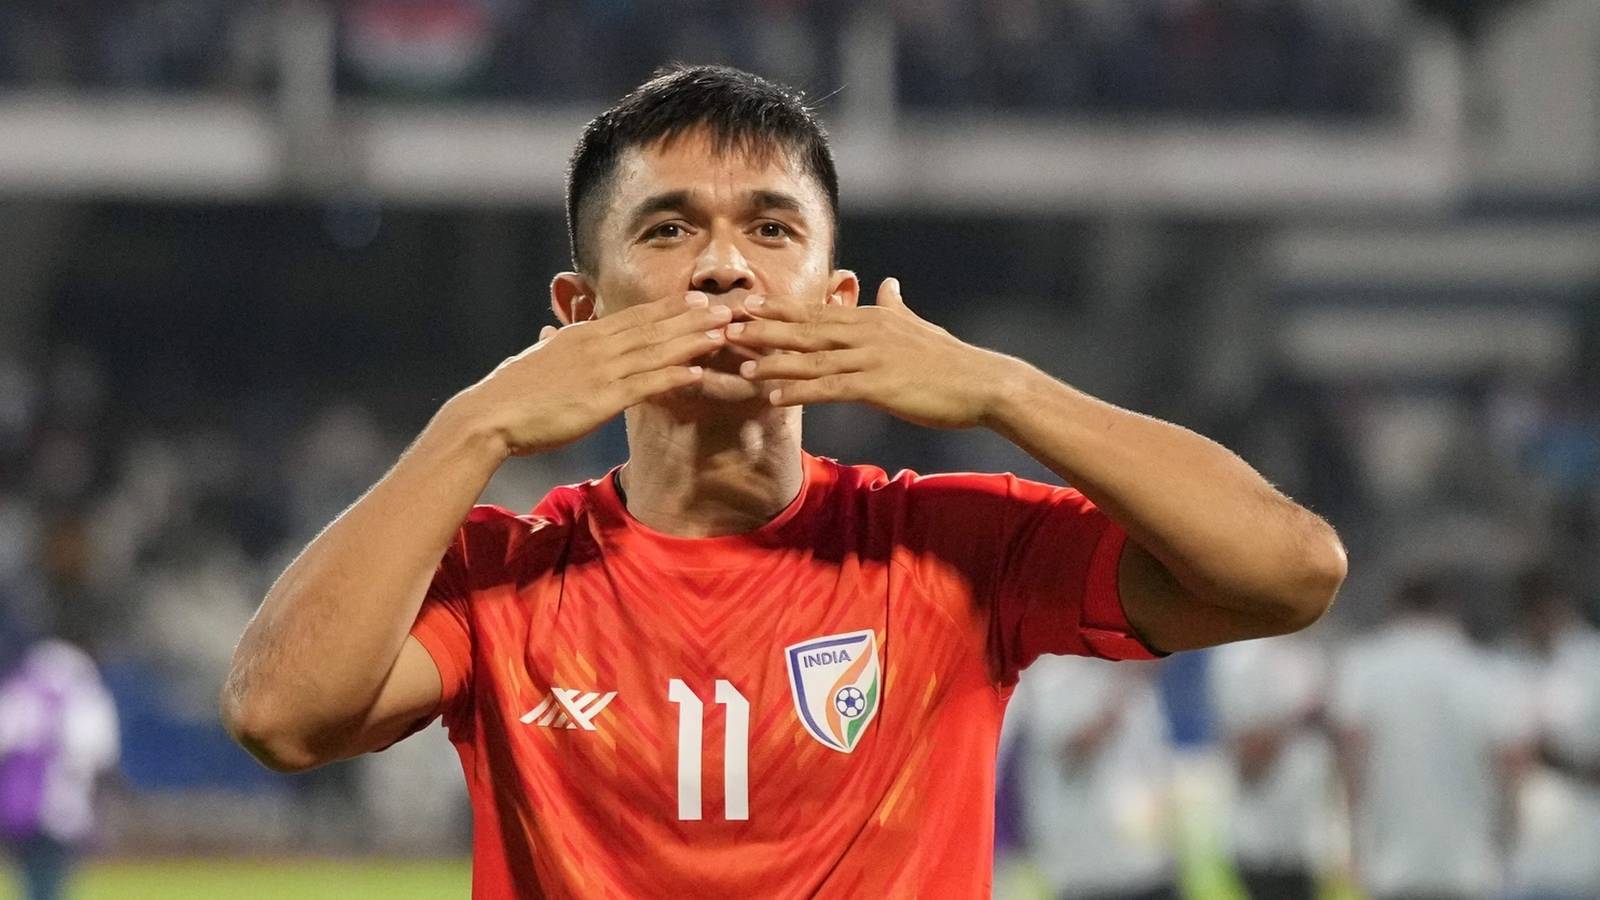 The end of an era for Indian football: Sunil Chhetri hangs up his boots